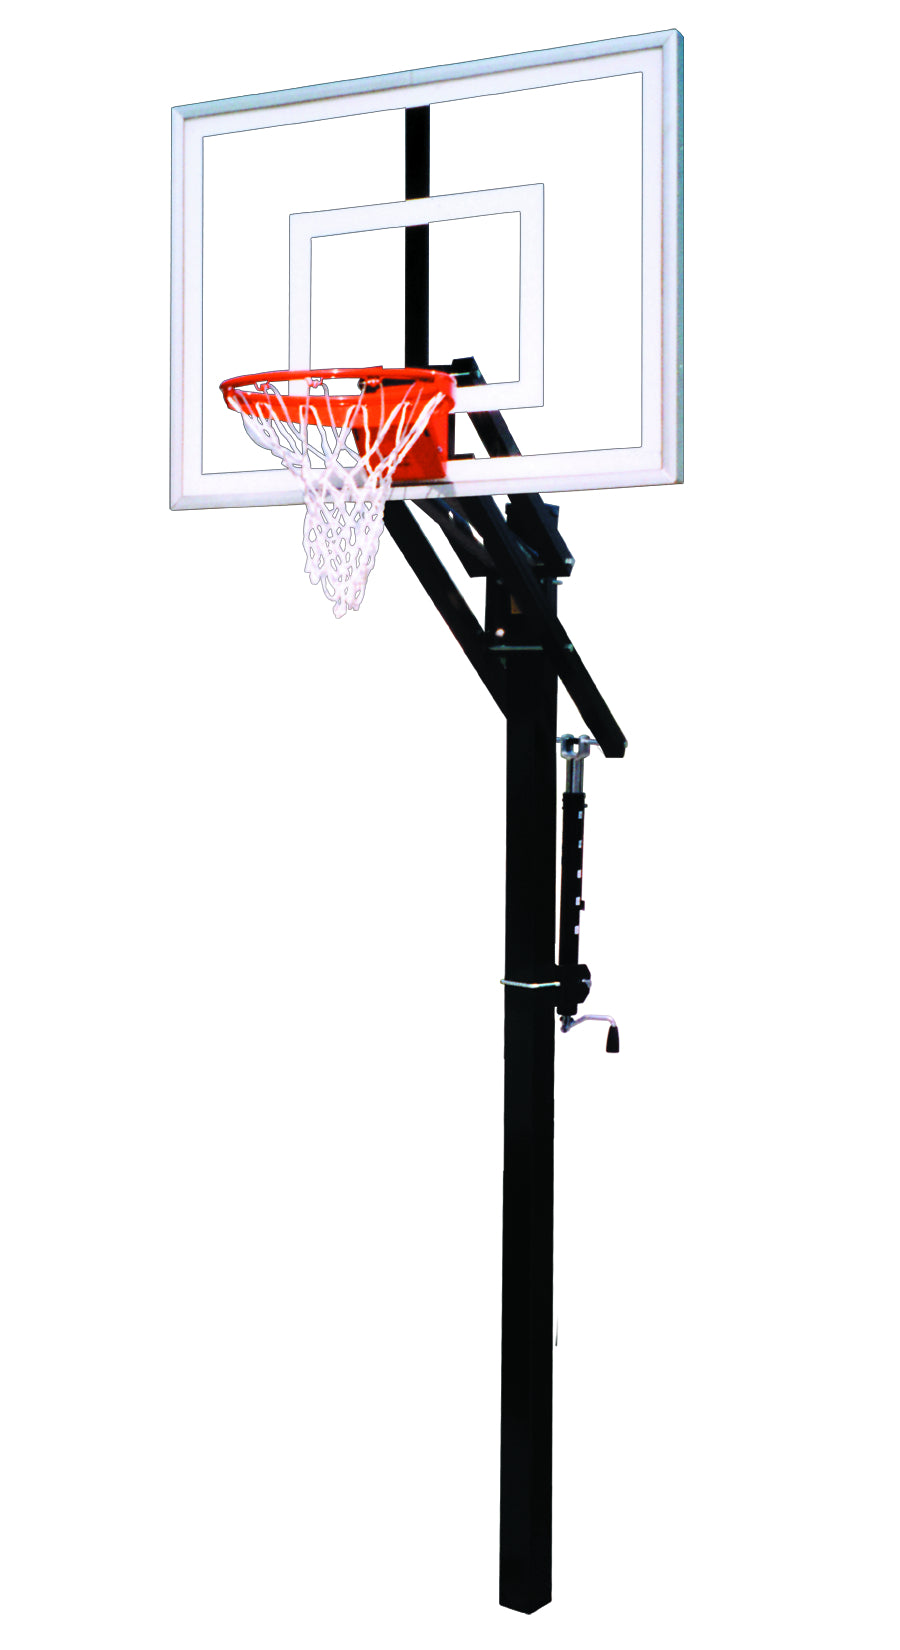 First Team Jam Turbo In Ground Basketball Goal - 36"x54" Tempered Glass